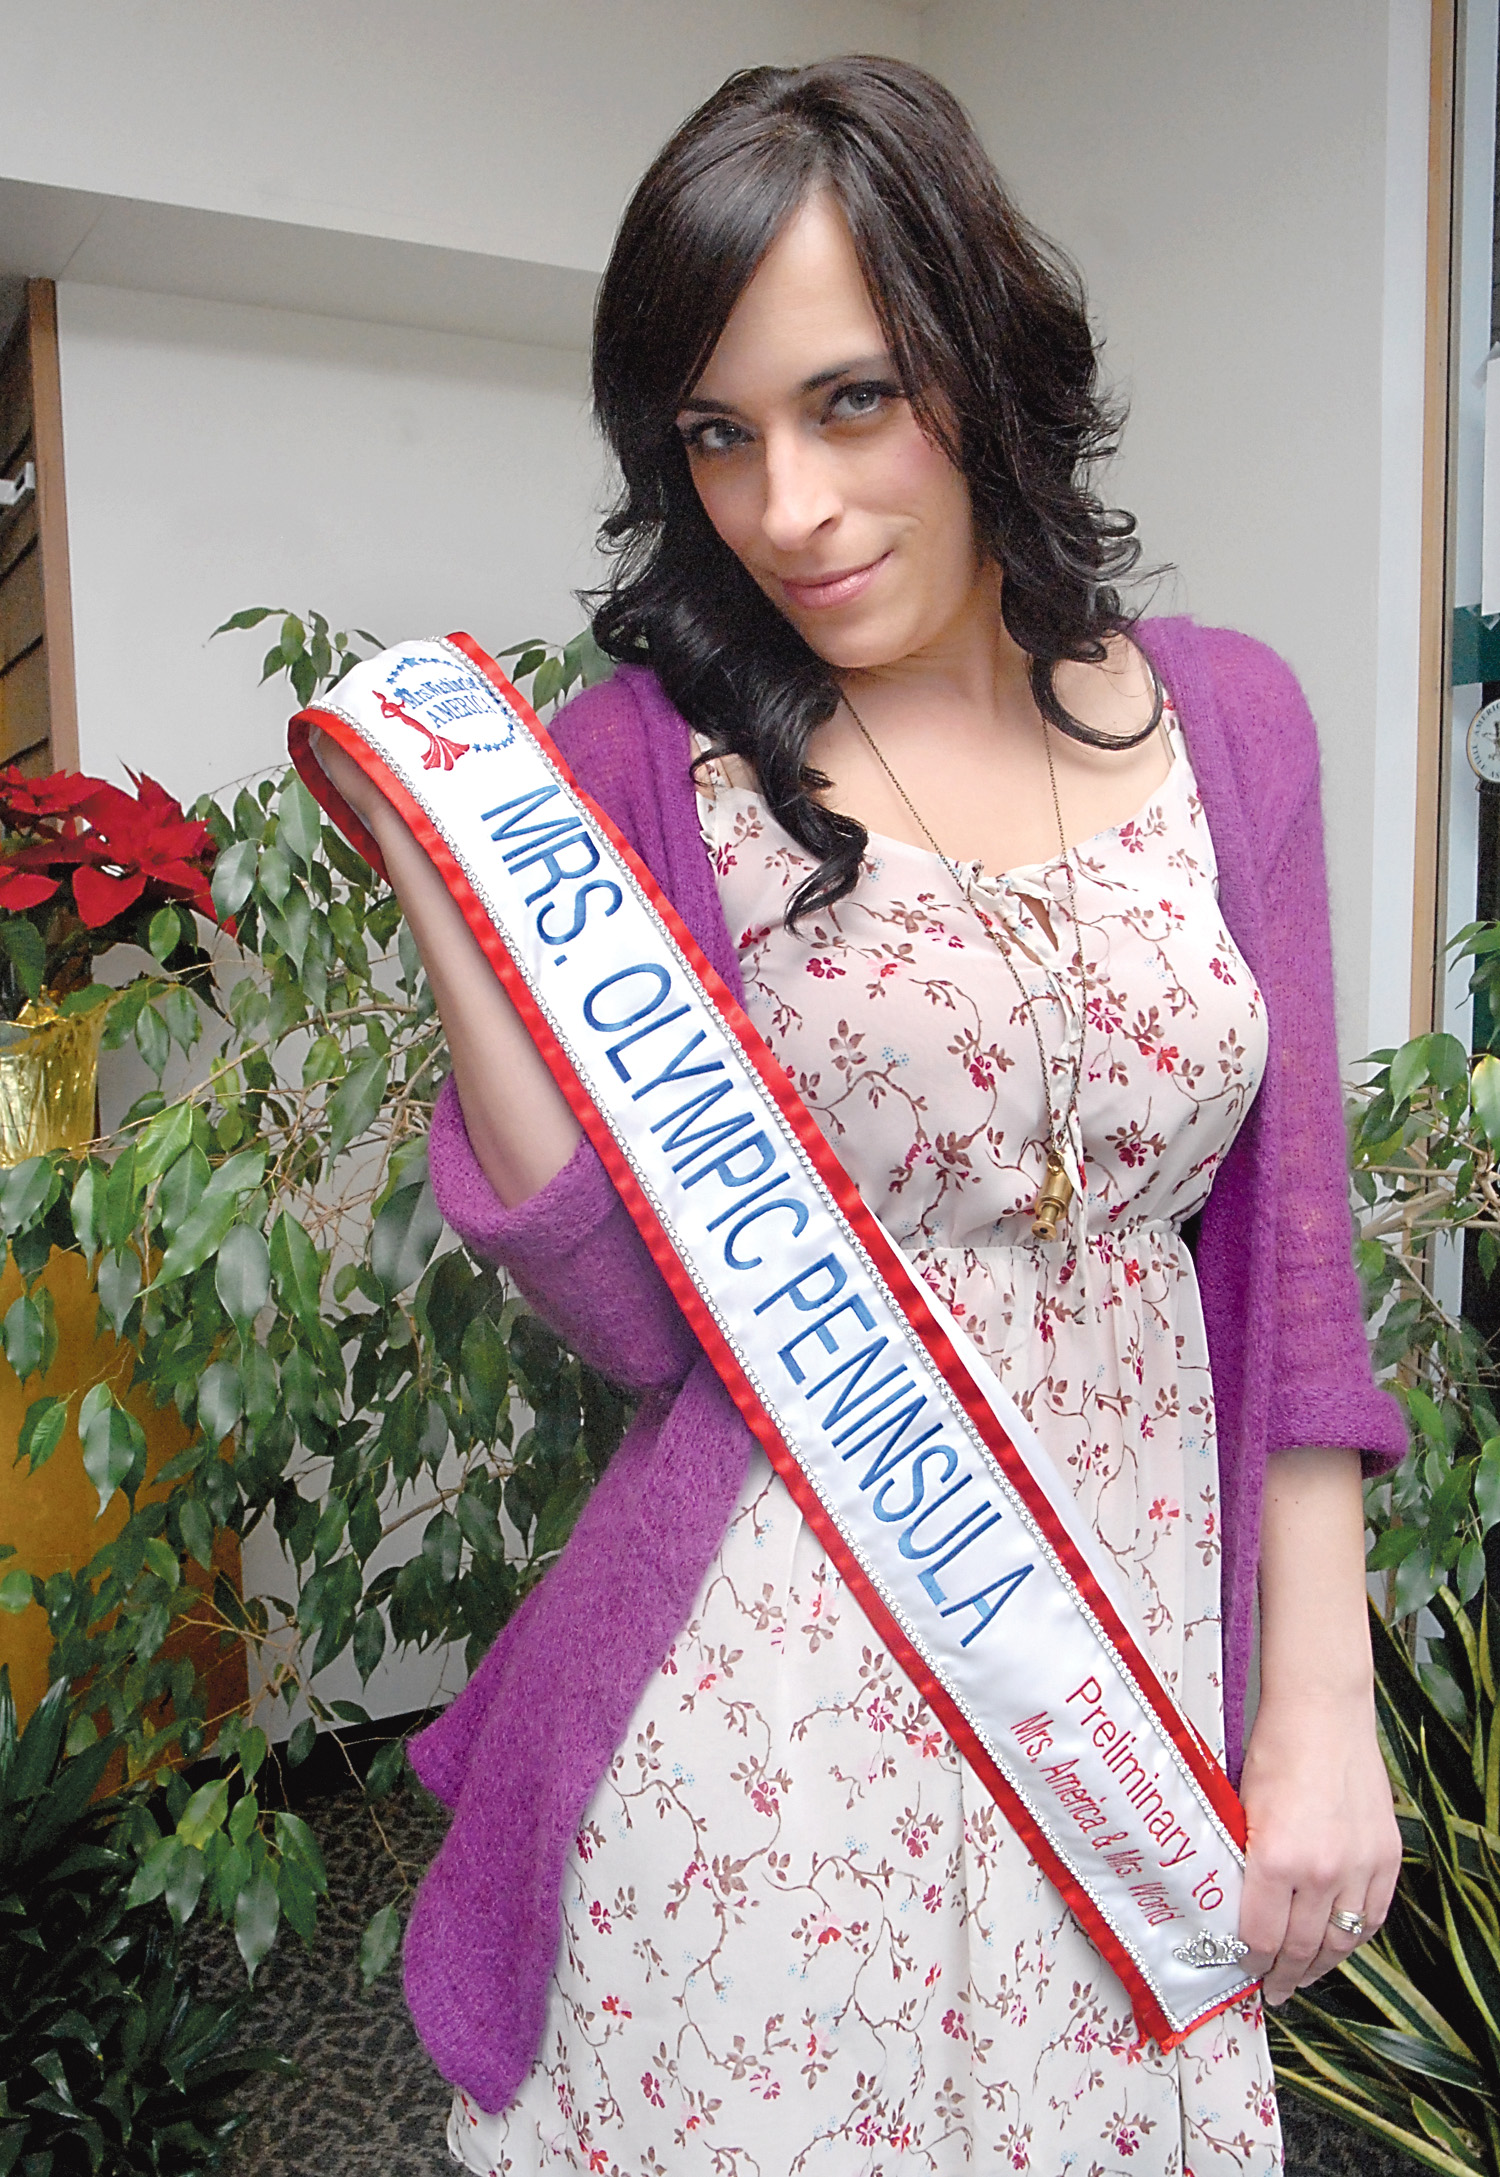 Magan Waldron of Sequim has been named Mrs. Olympic Peninsula and will vie for the Mrs. Washington crown. — Keith Thorpe/Peninsula Daily News ()